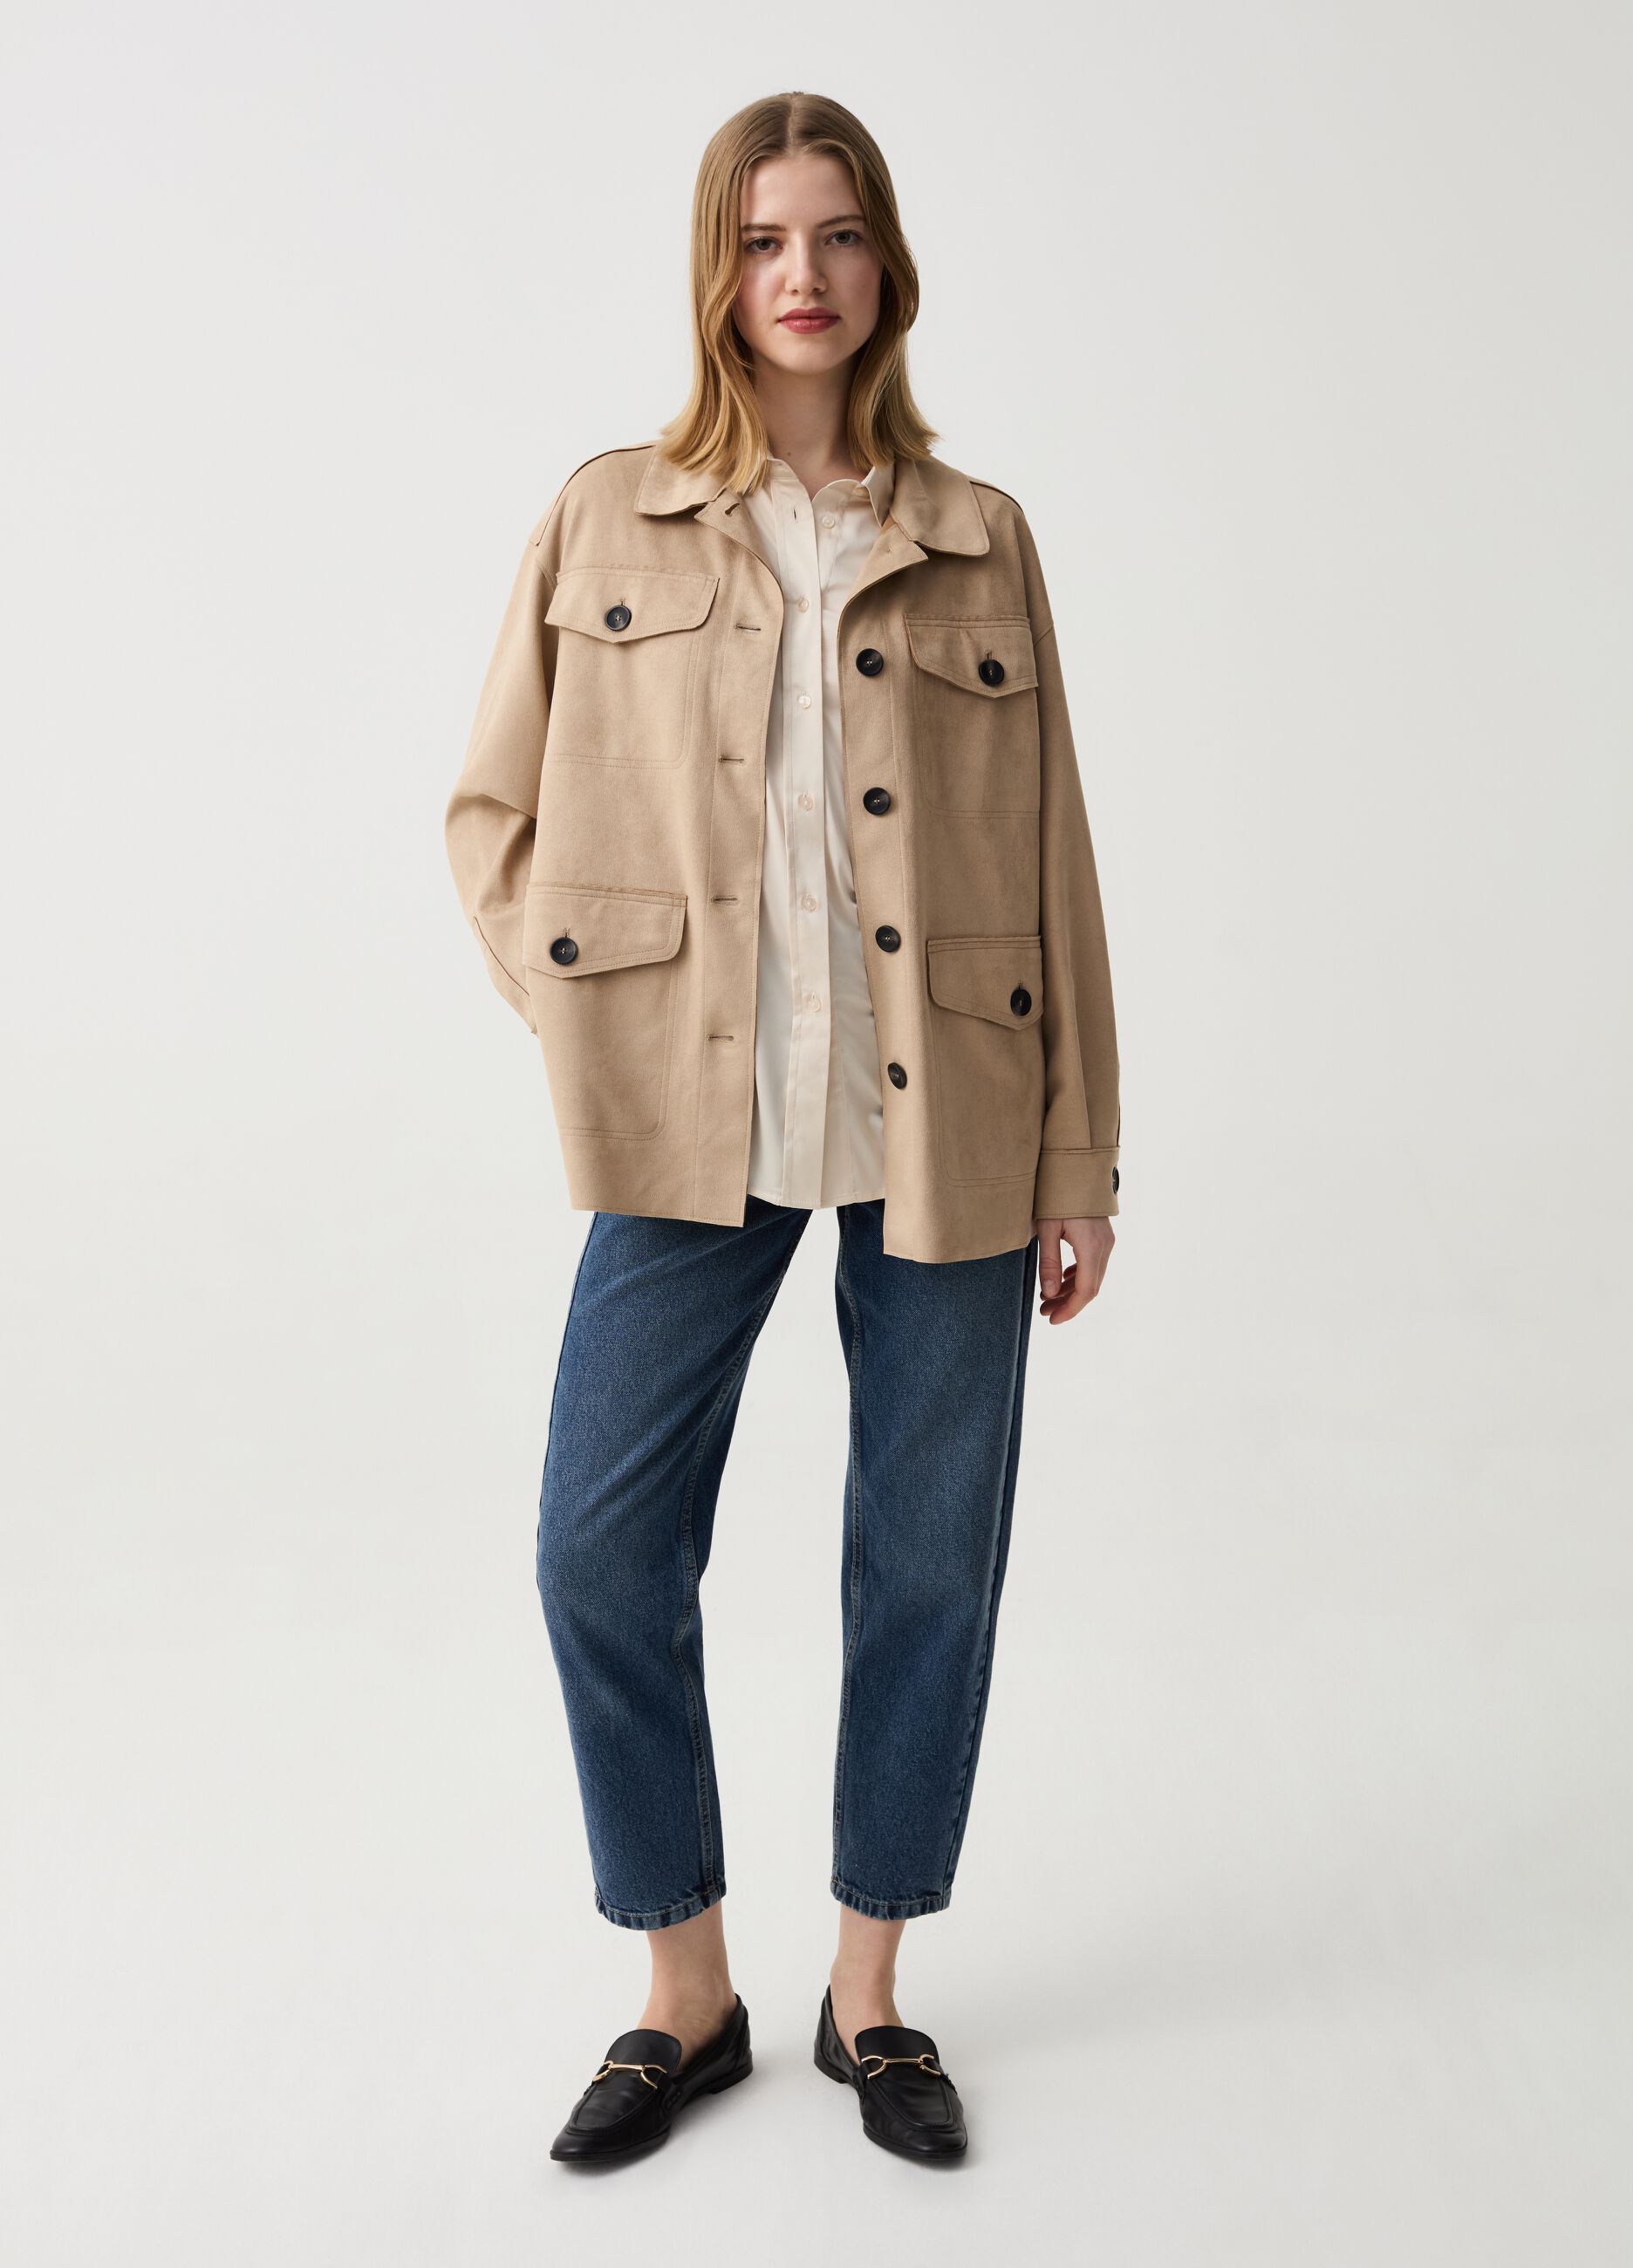 Short suede jacket with pockets